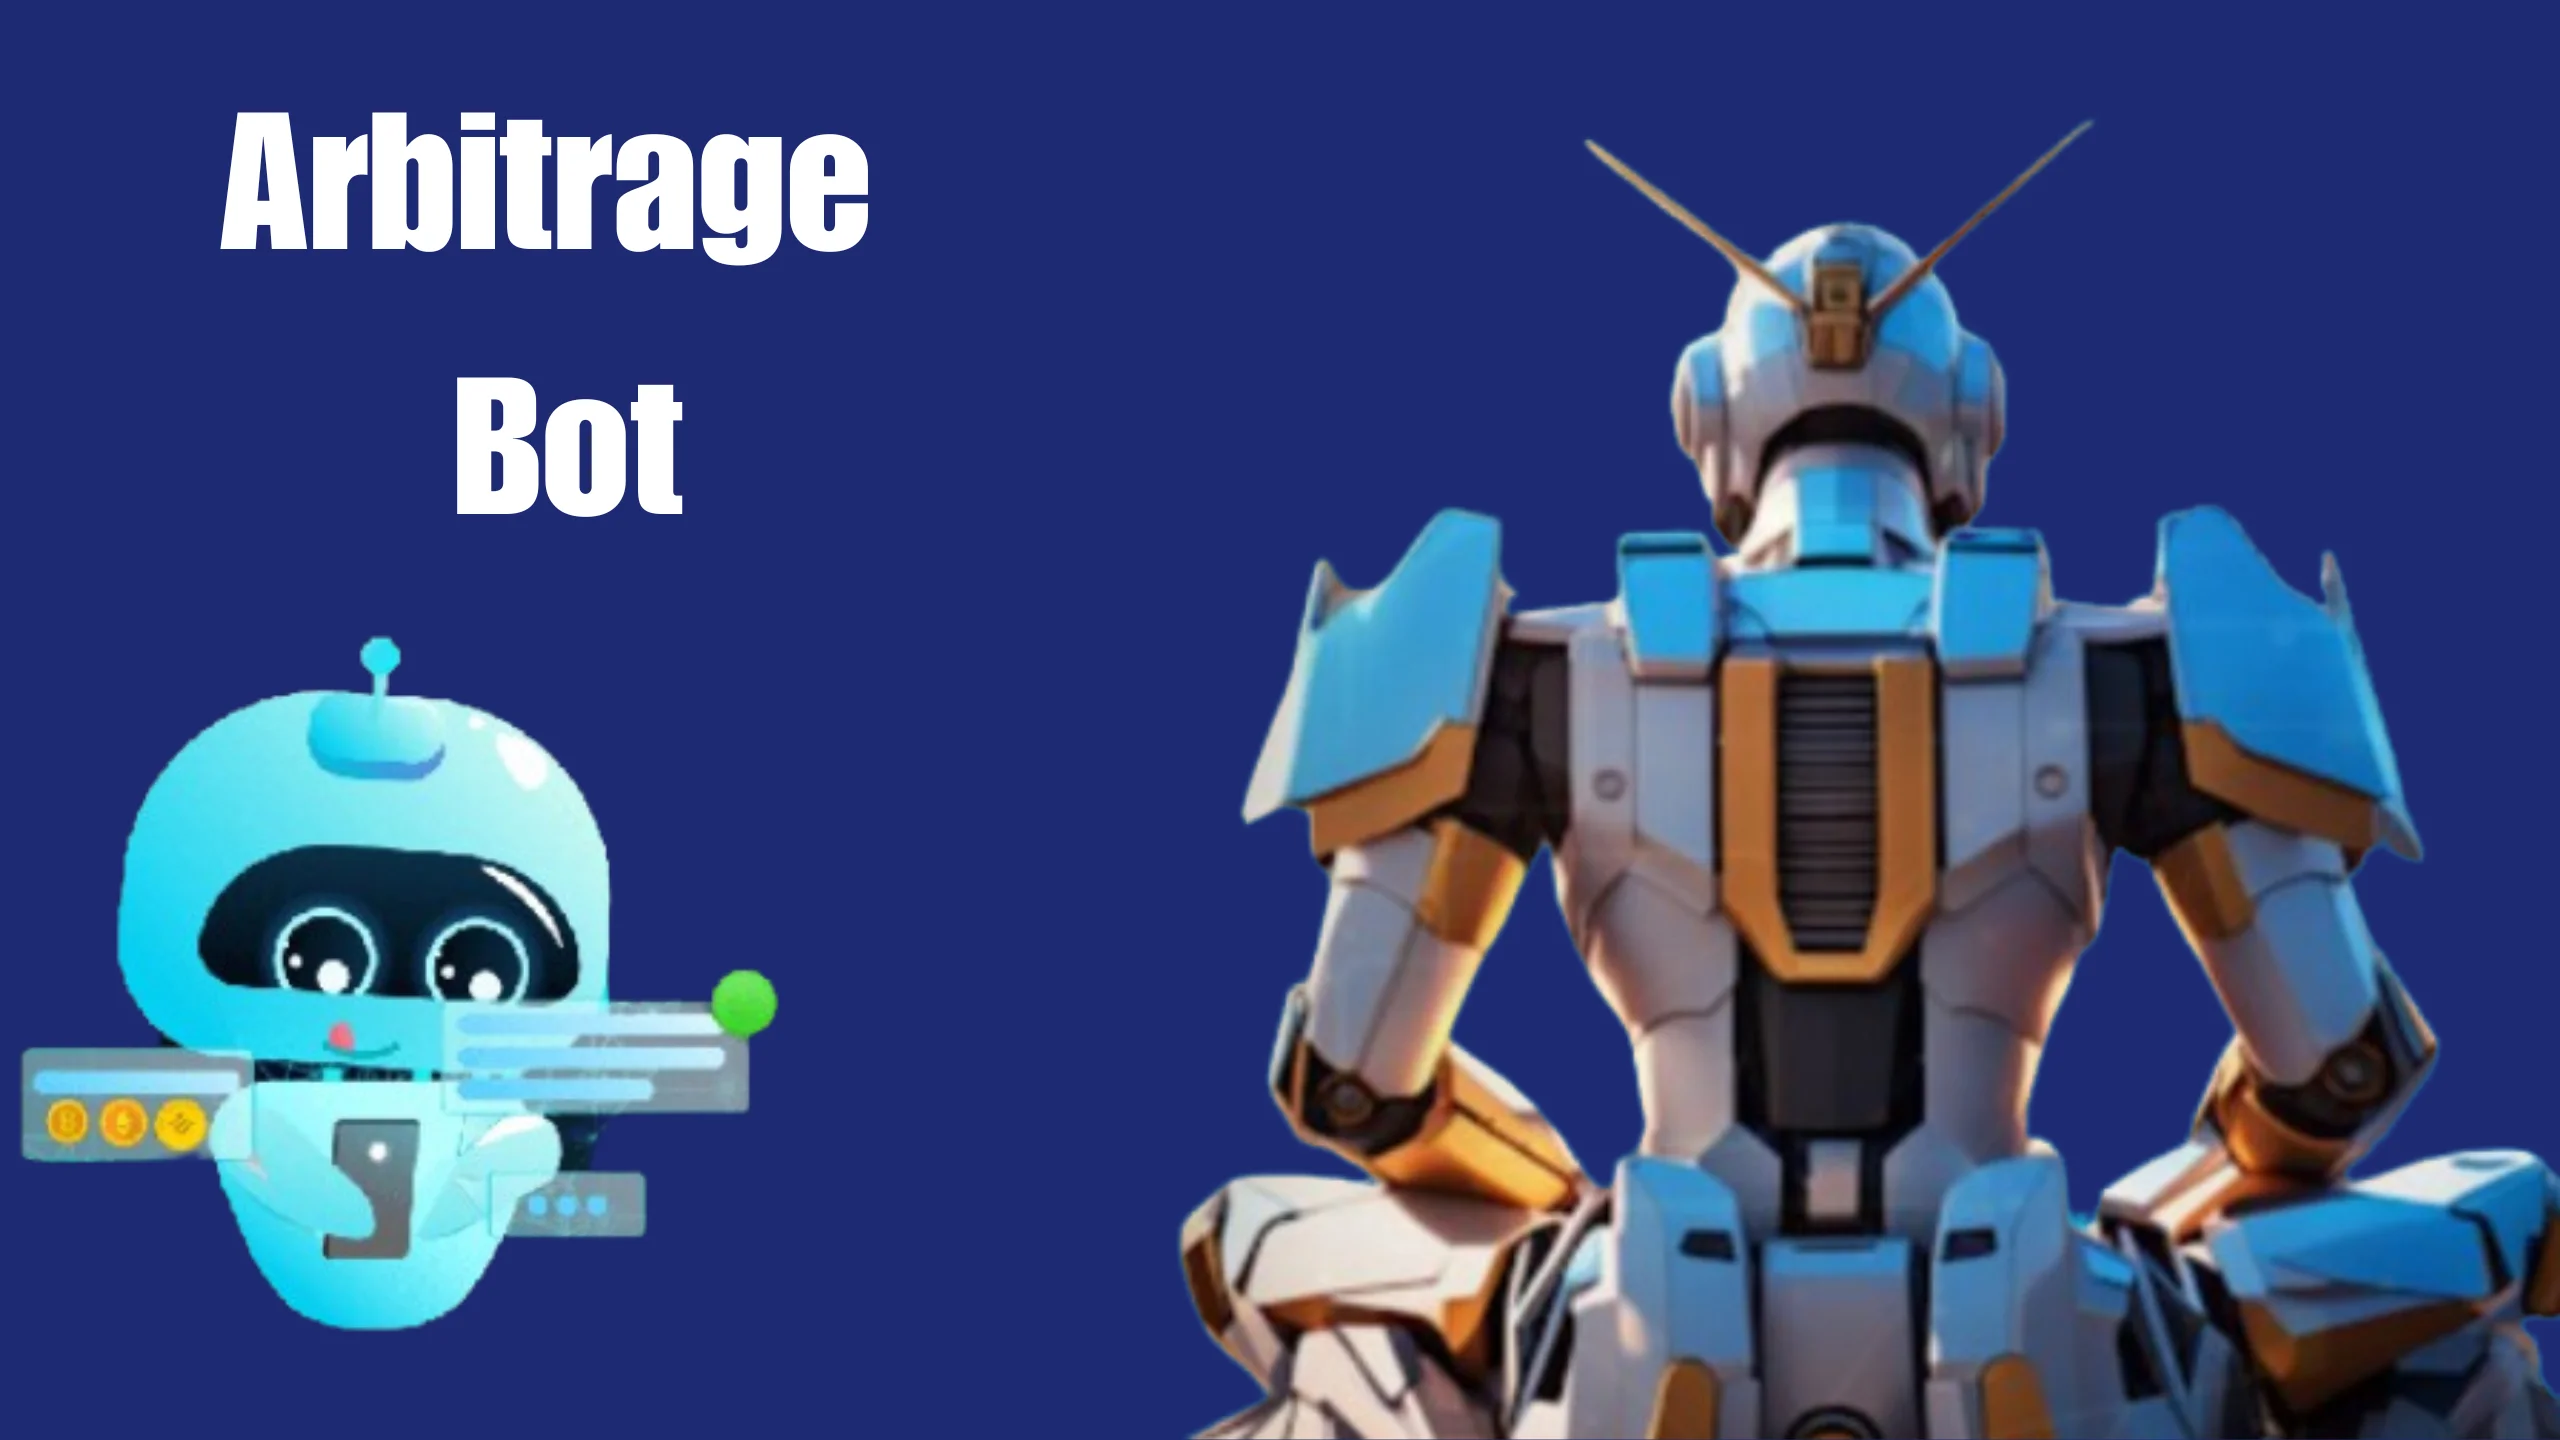 Learn how to develop a Cross Exchange Arbitrage Bot to capitalize on market inefficiencies.